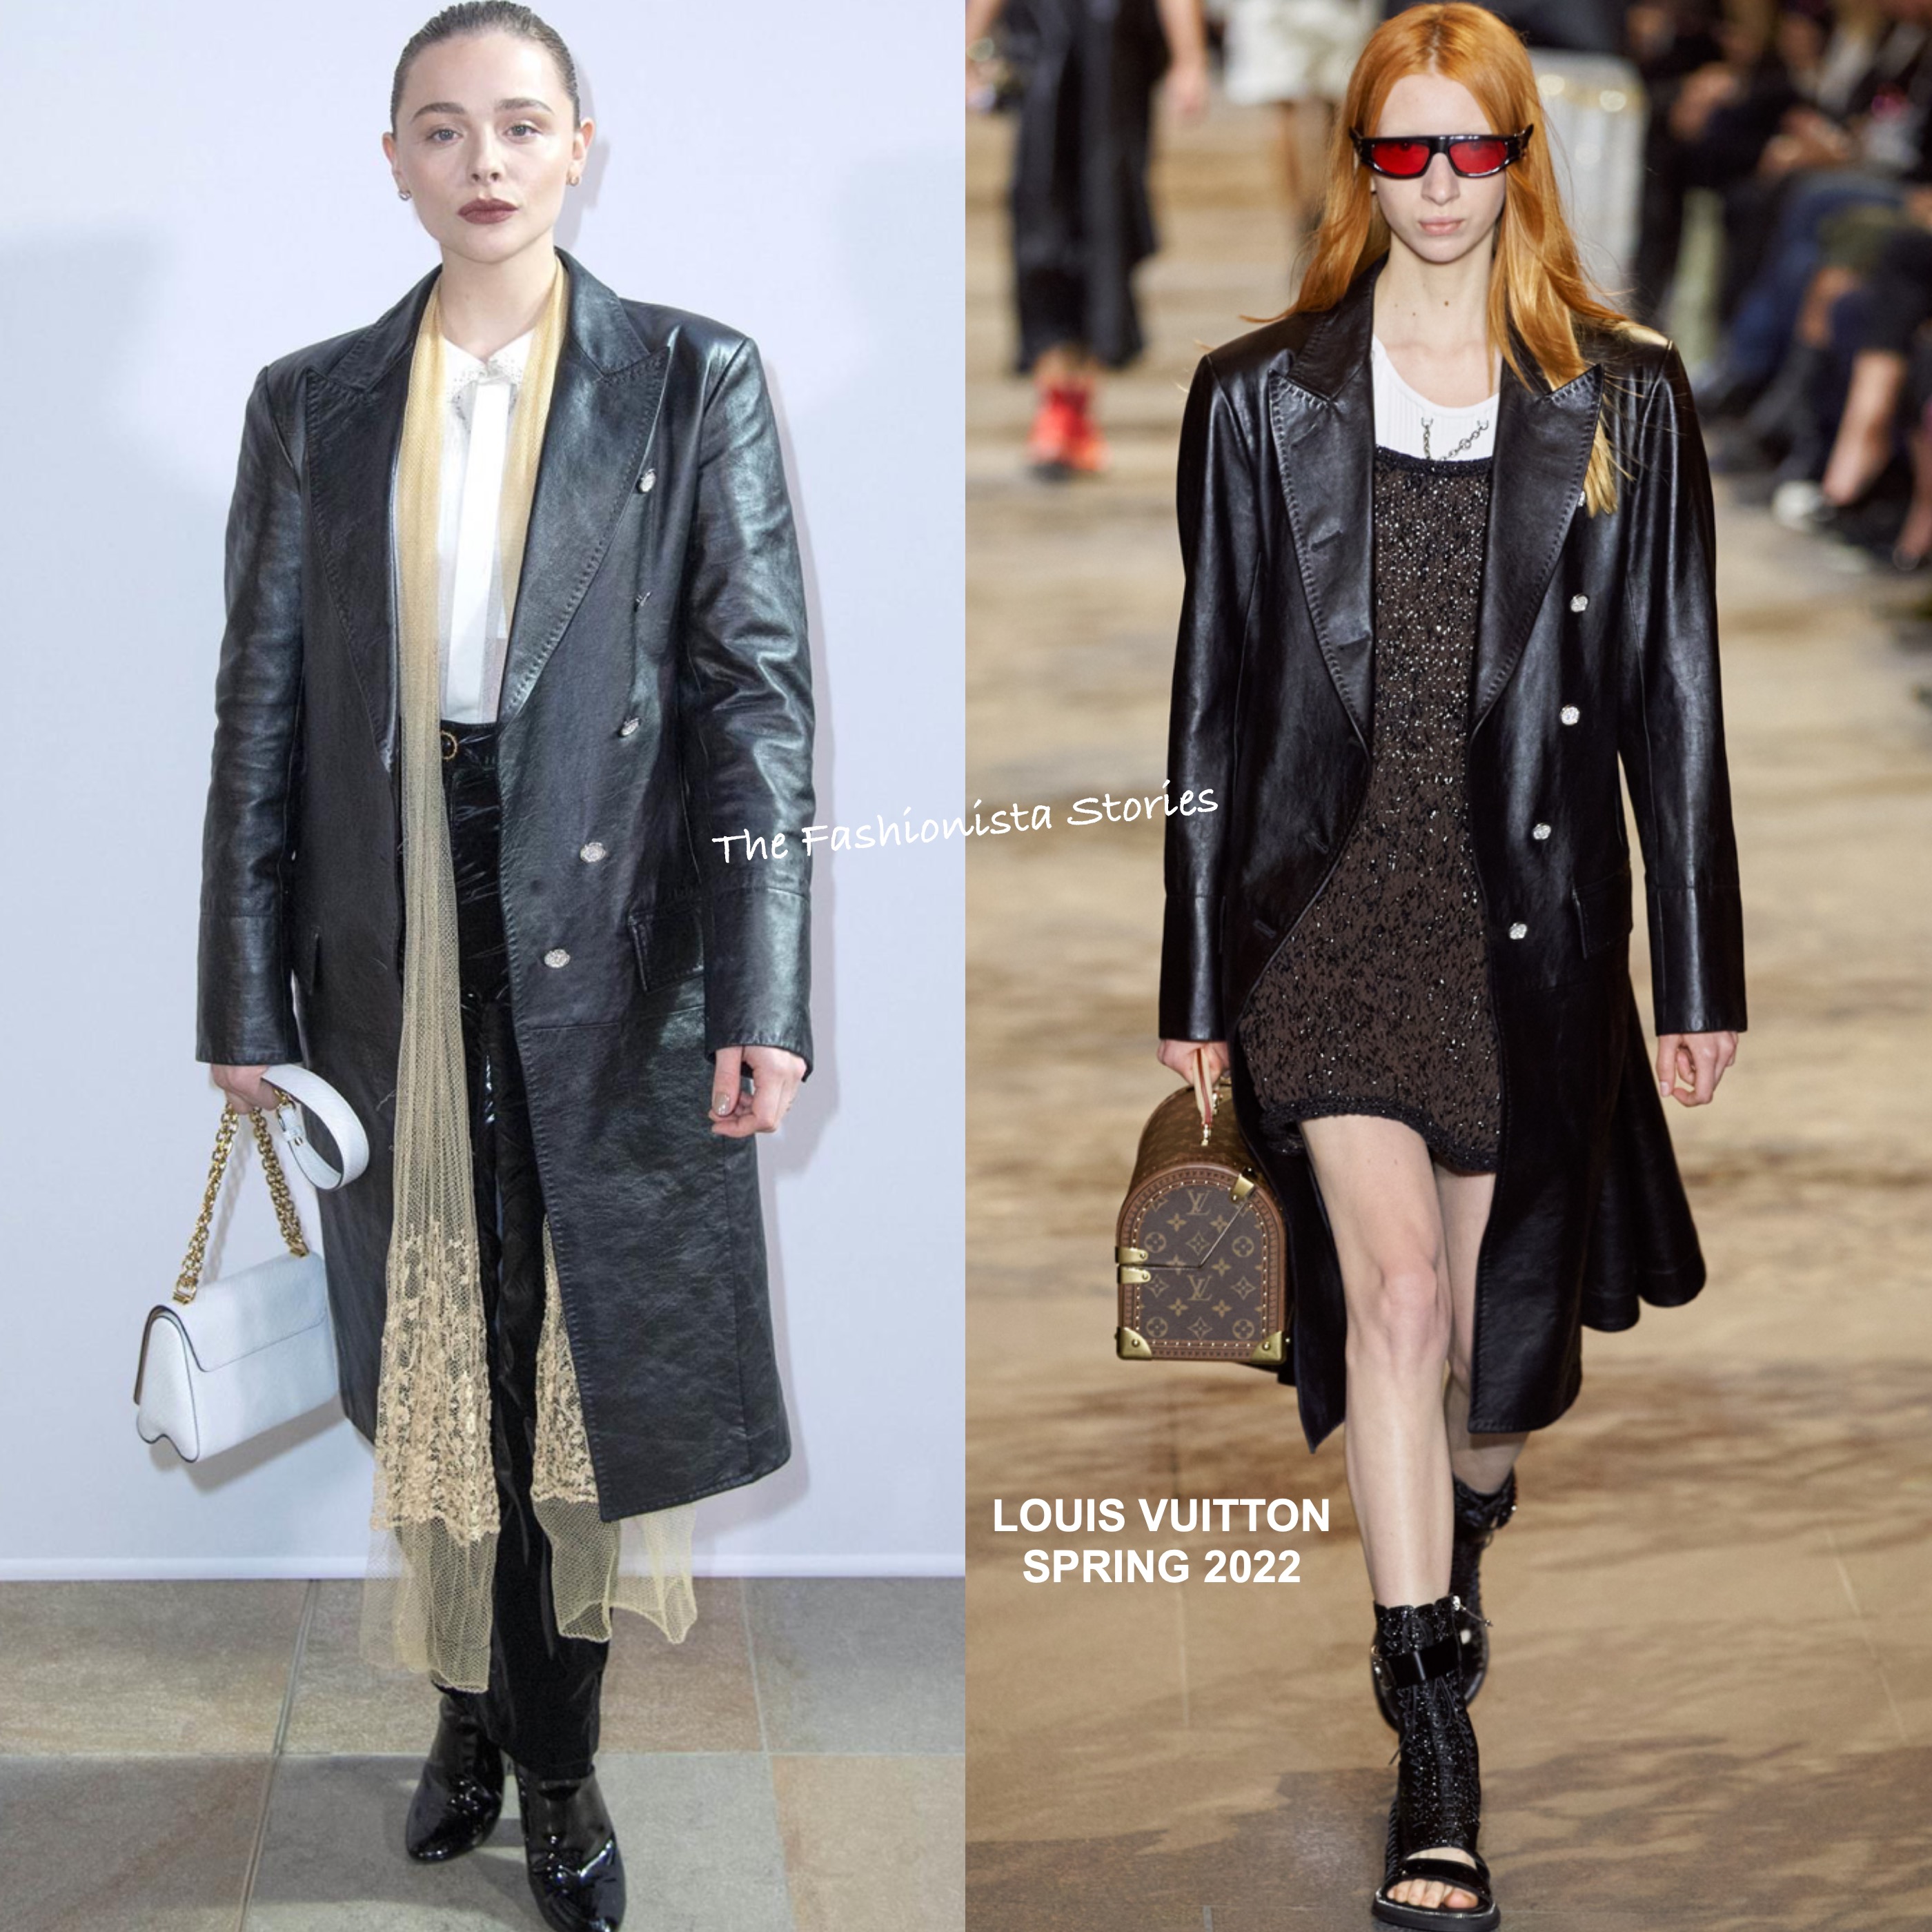 Emma Stone Dons Louis Vuitton Trench-Inspired Mini Dress At NYC